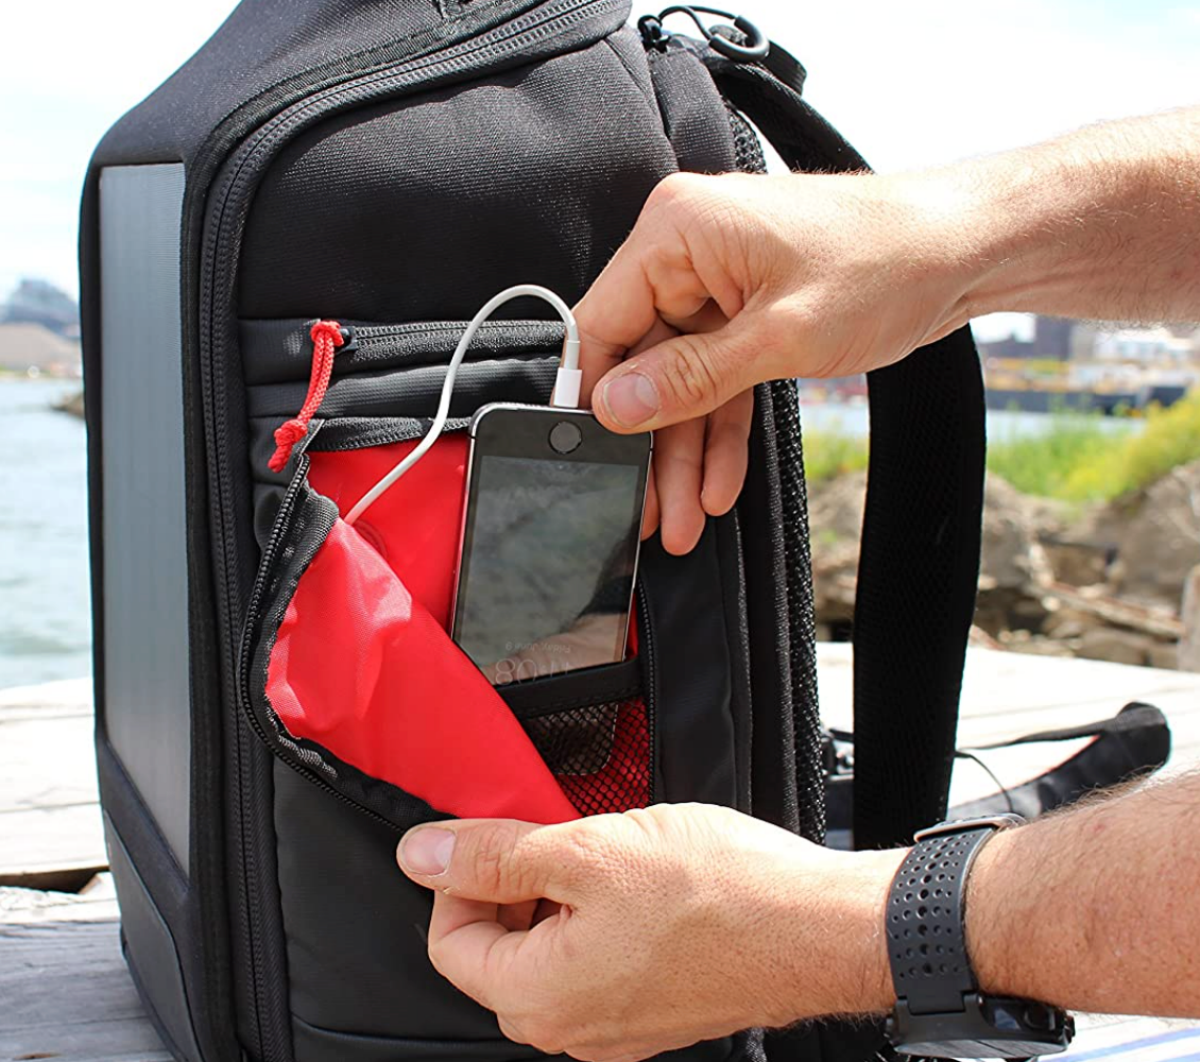 A smartphone charged by the Voltaic Systems OffGrid Solar Backpack Charger